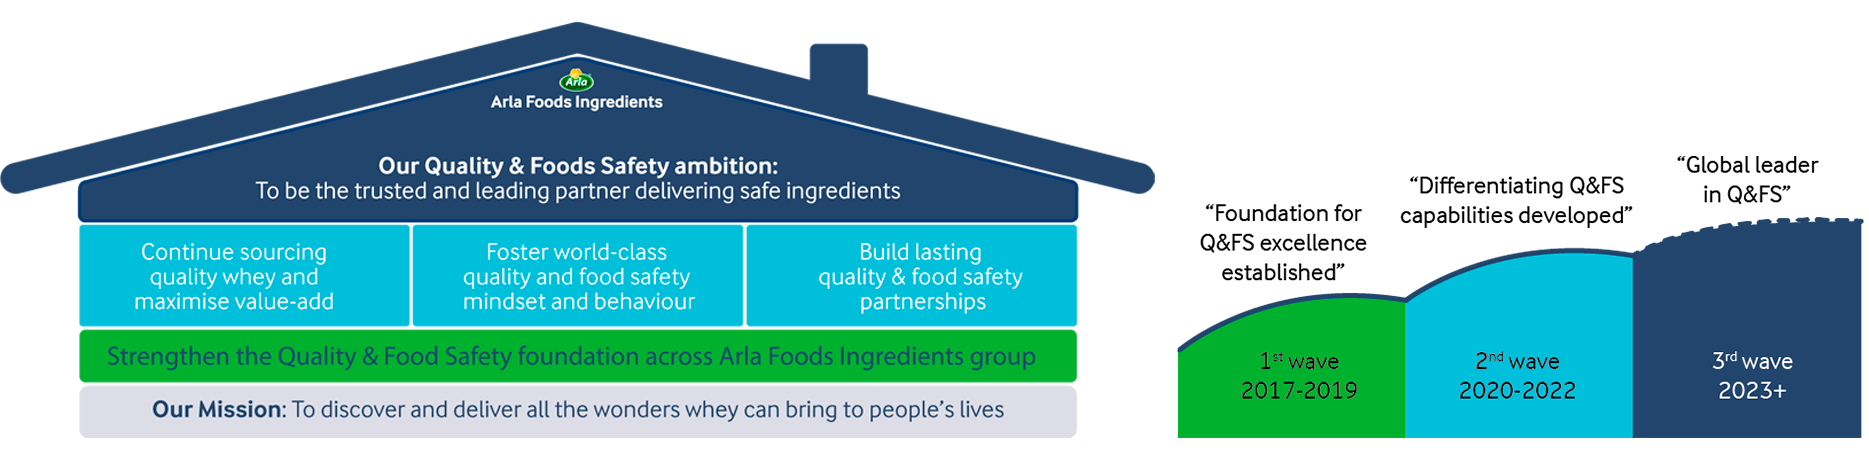 Our Quality & Food Safety strategy